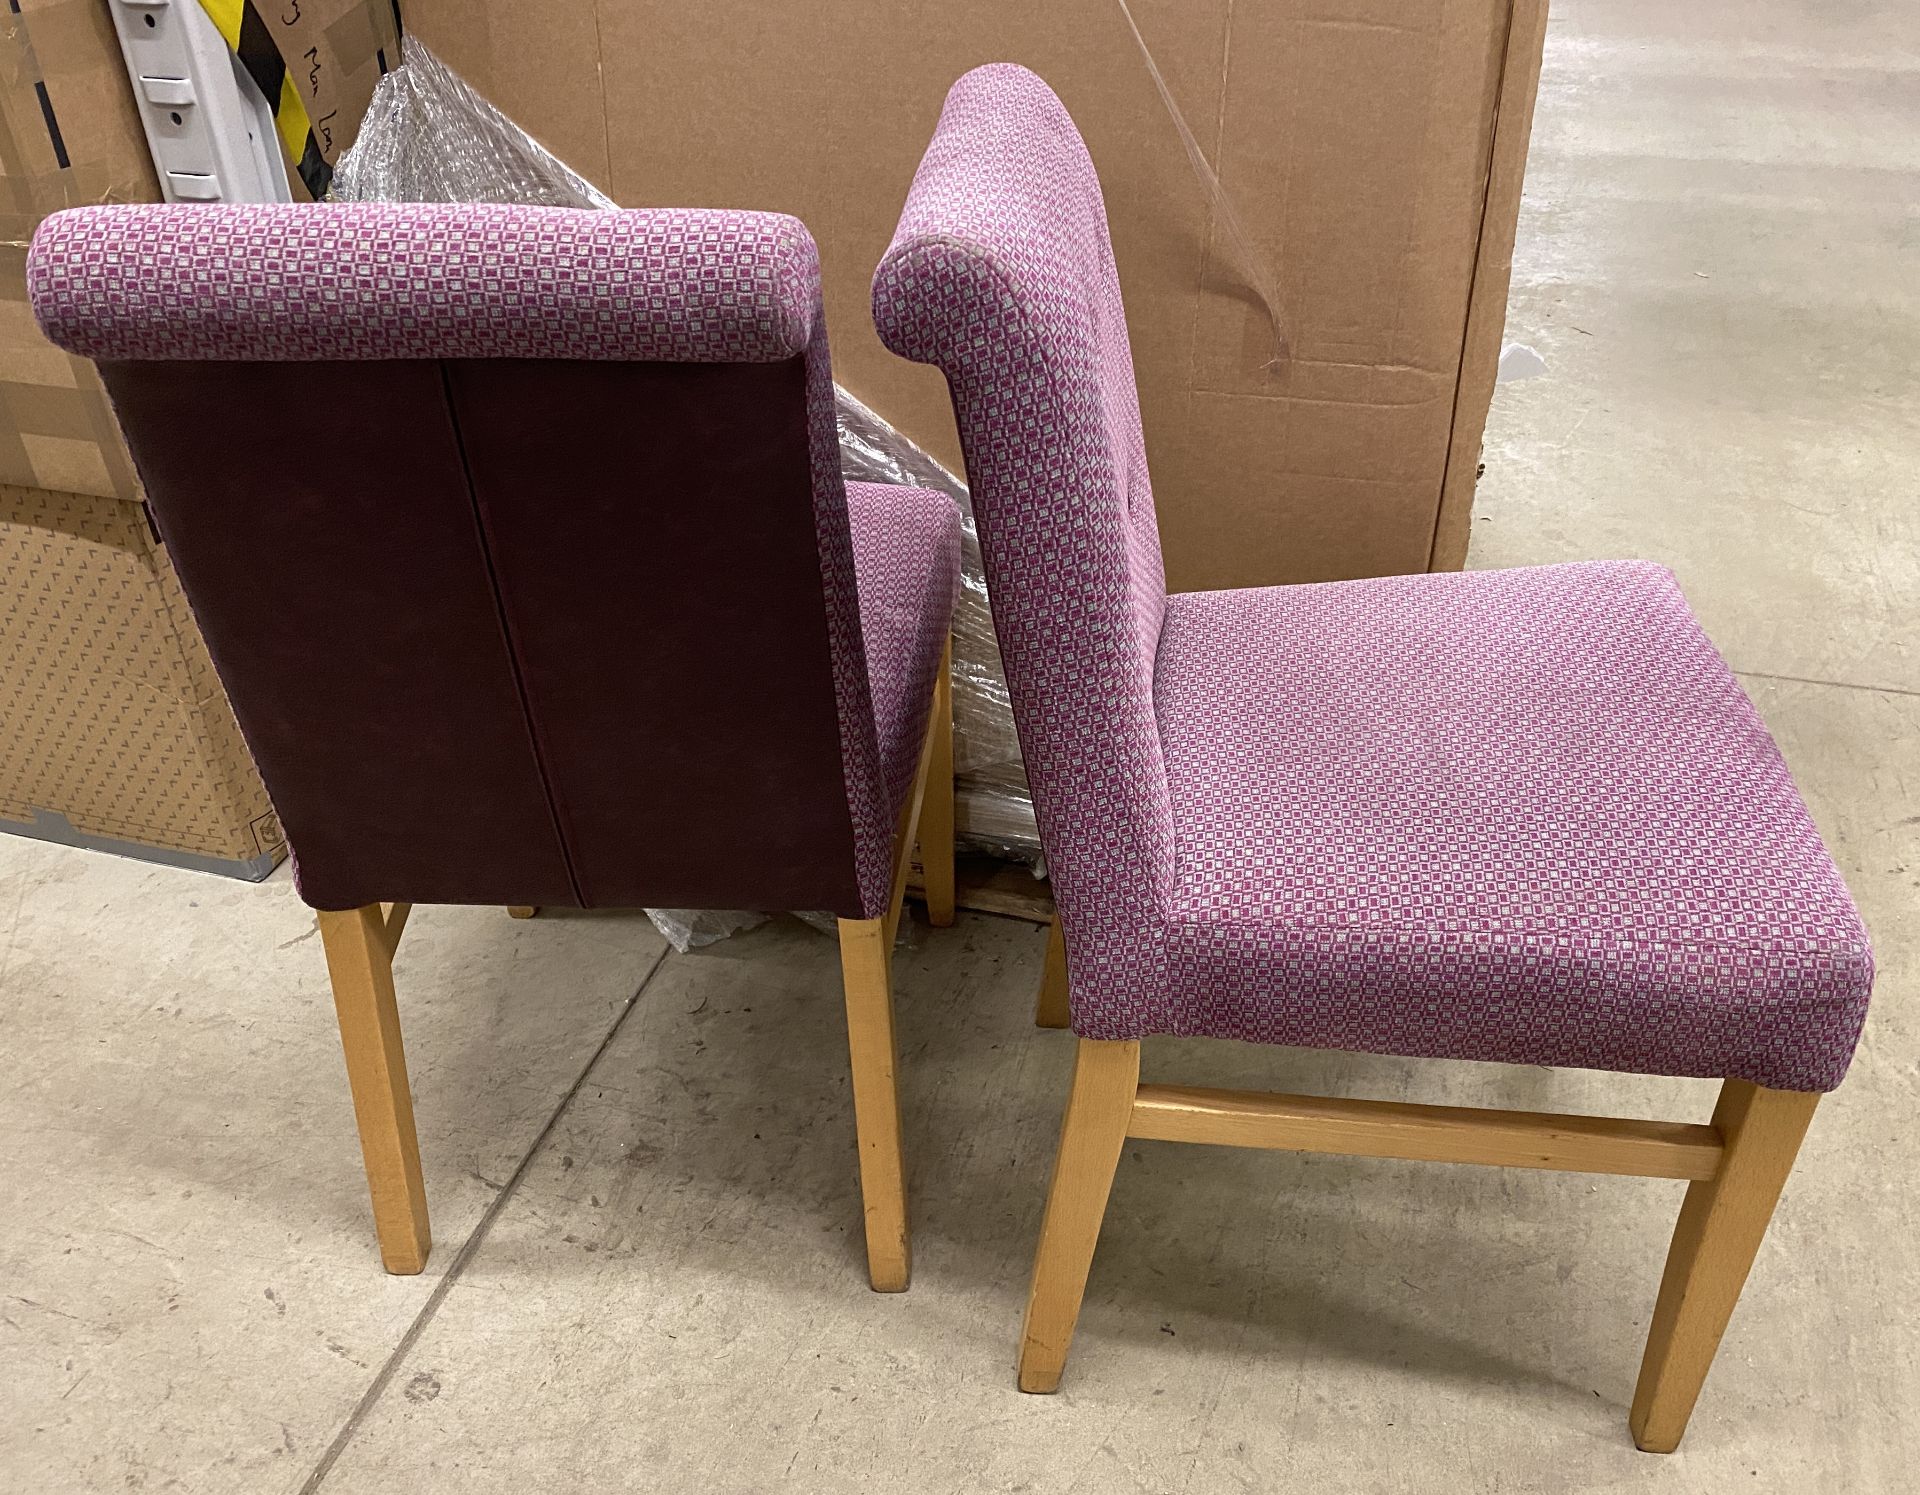 4 x Wooden Framed Rolled Backed Purple Patterned Upholstered Dining Chairs with Purple Leather - Image 2 of 2